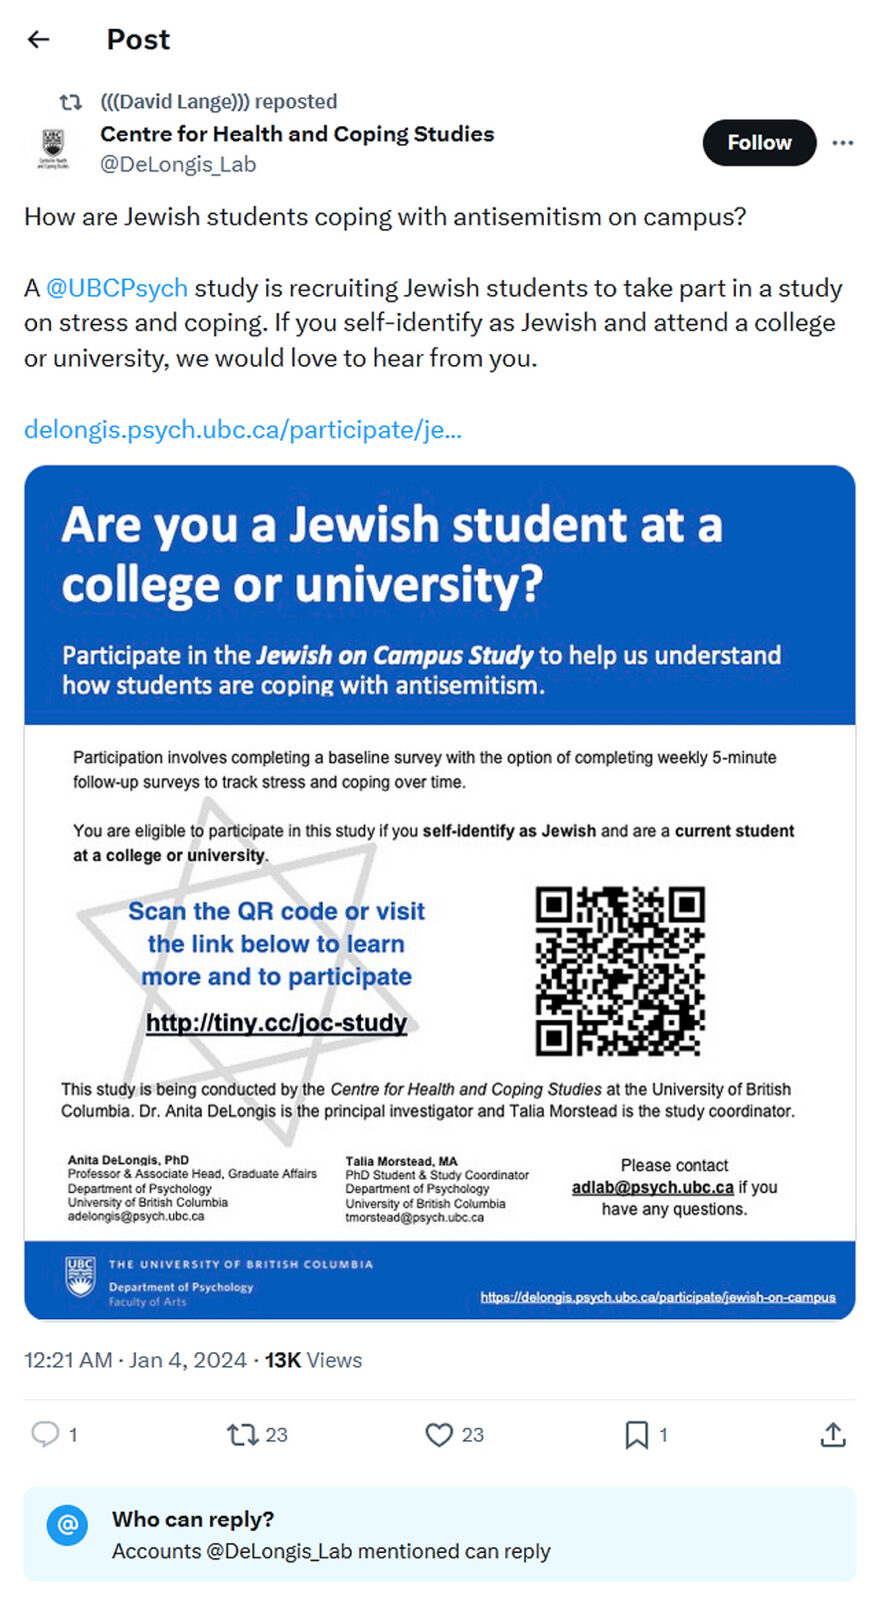 How are Jewish students coping with antisemitism on campus